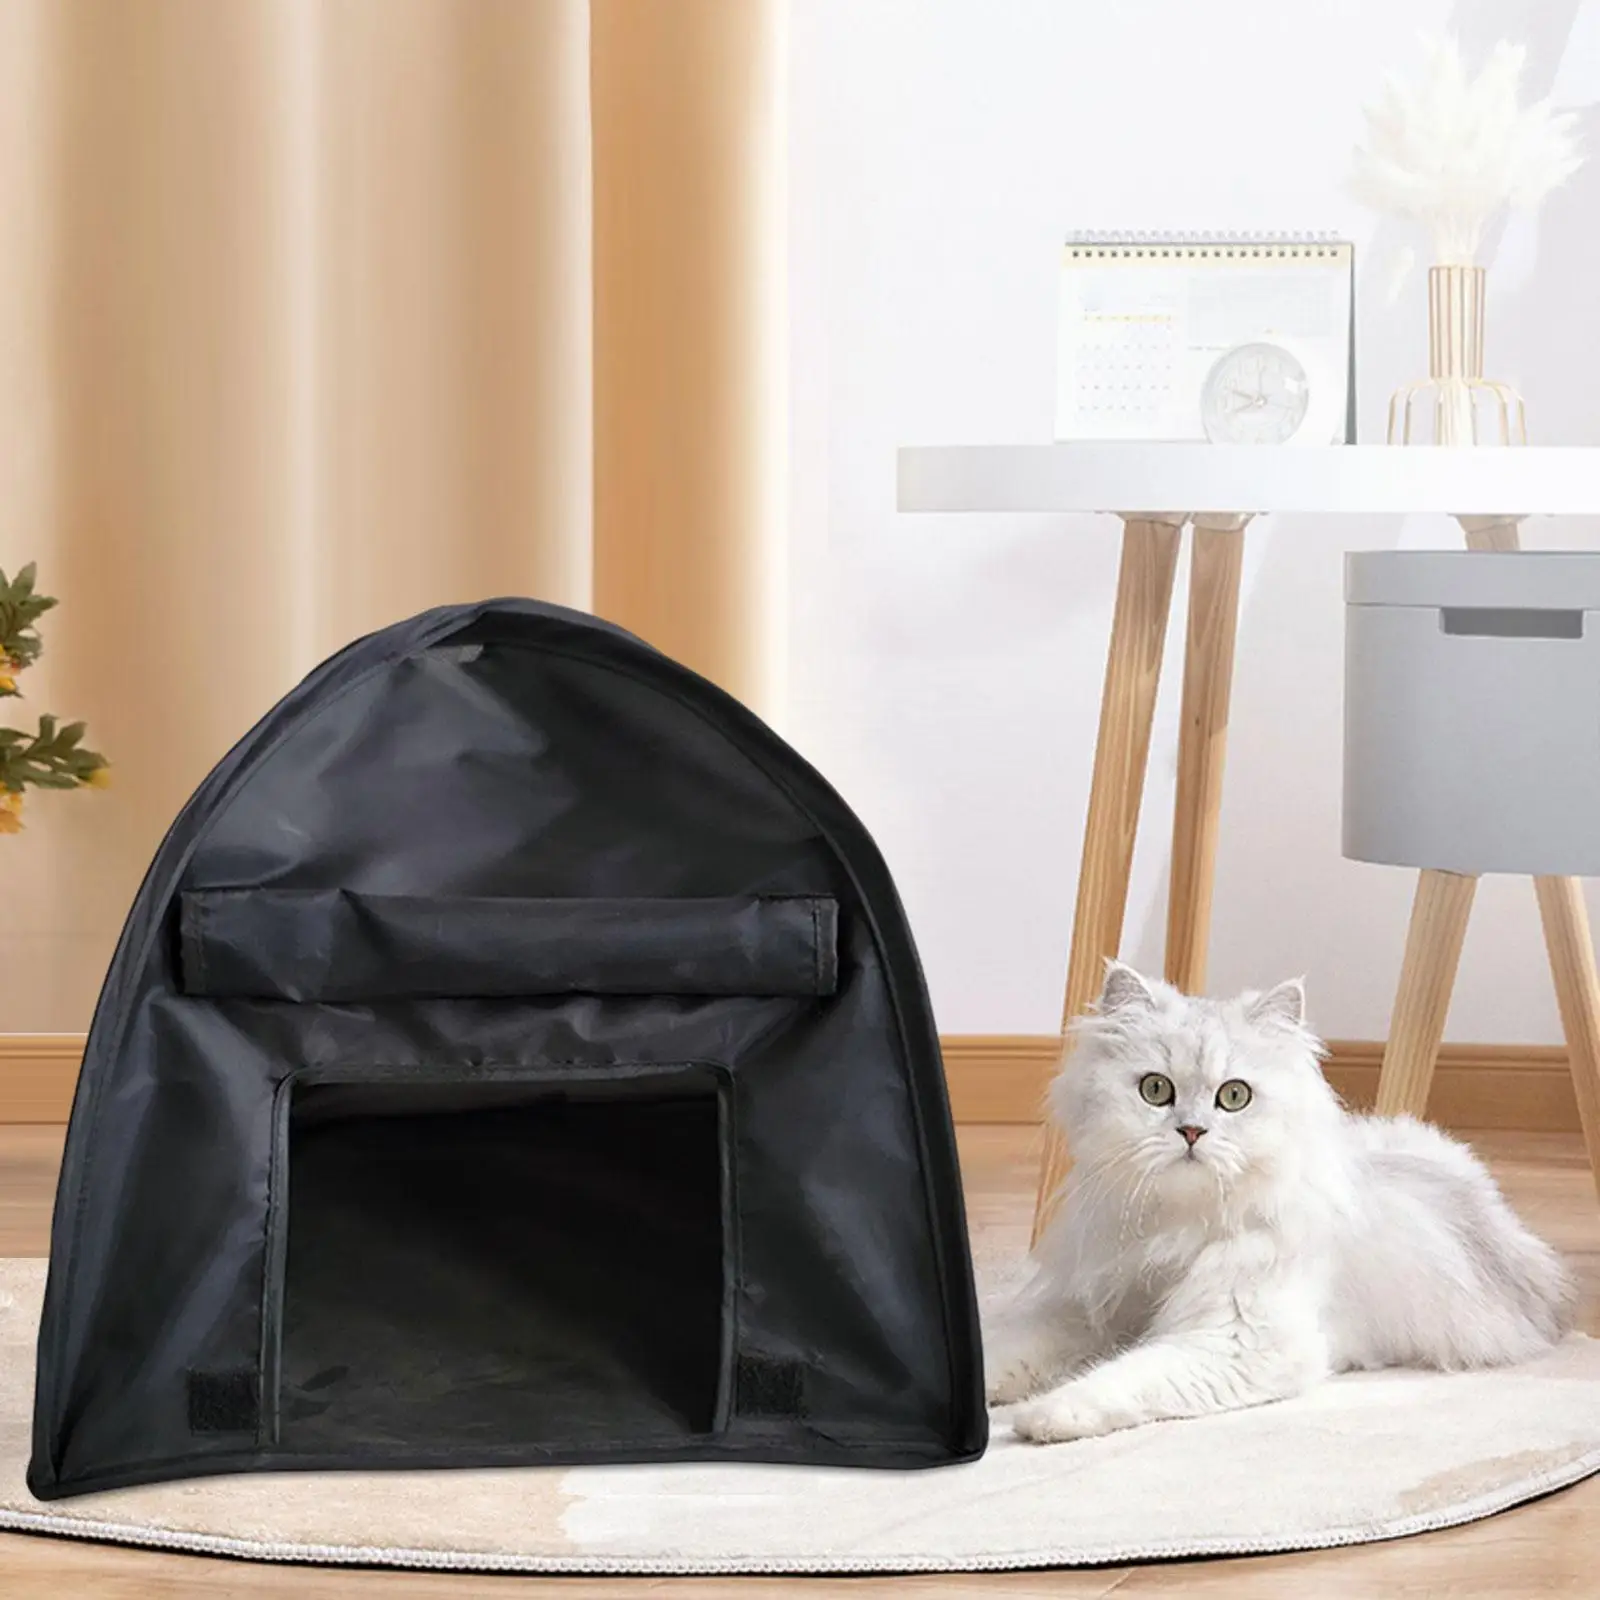 Portable Pet Playpen Cage Hideout Exercise Tent Puppy Kennel Foldable Fence Dog House for Cats Bunny Small Animals Dogs Camping